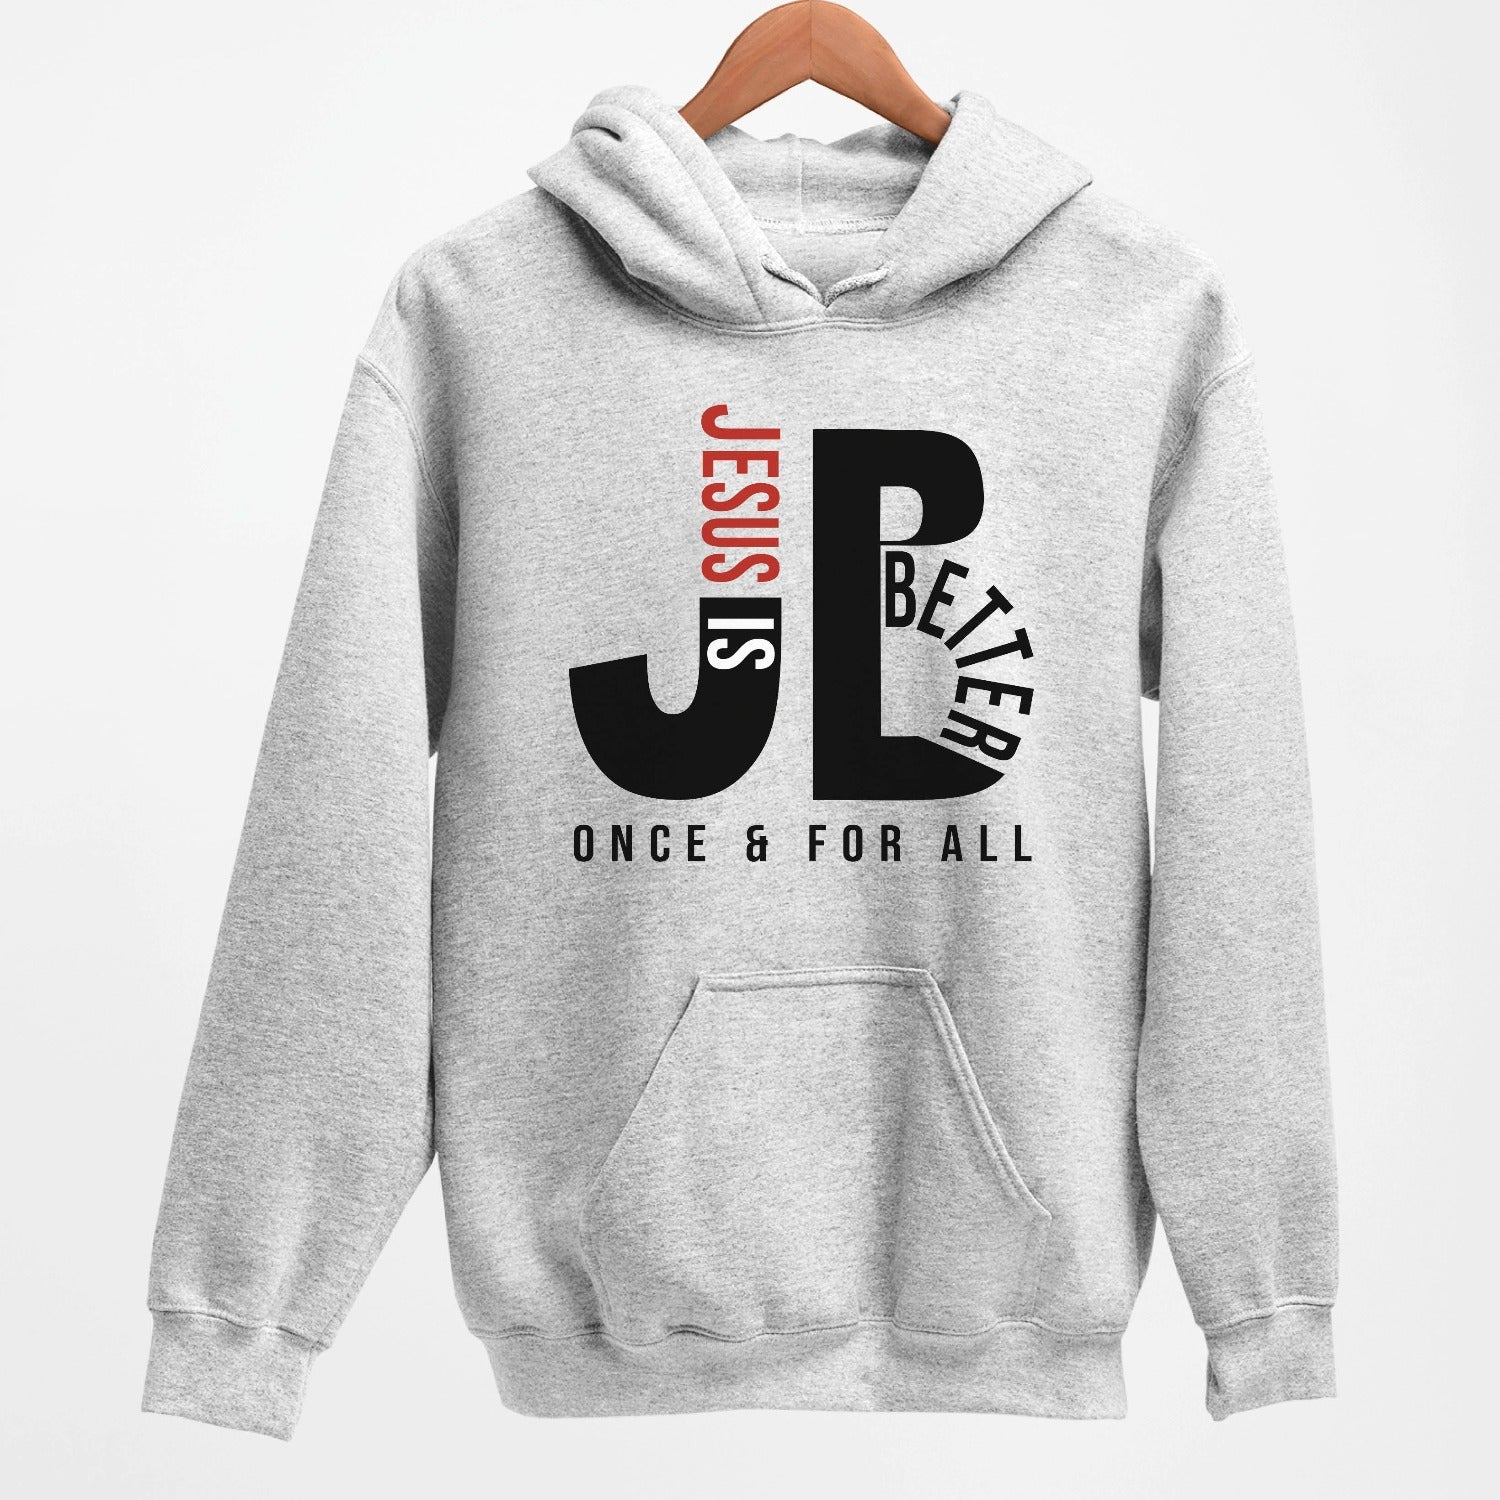 Cozy "JB" typography "Jesus is Better Once and For All" design in black and red letters, based on the Christian bible book of Hebrews, printed on a heather sport gray color unisex hoodie, created for faith-based men and women